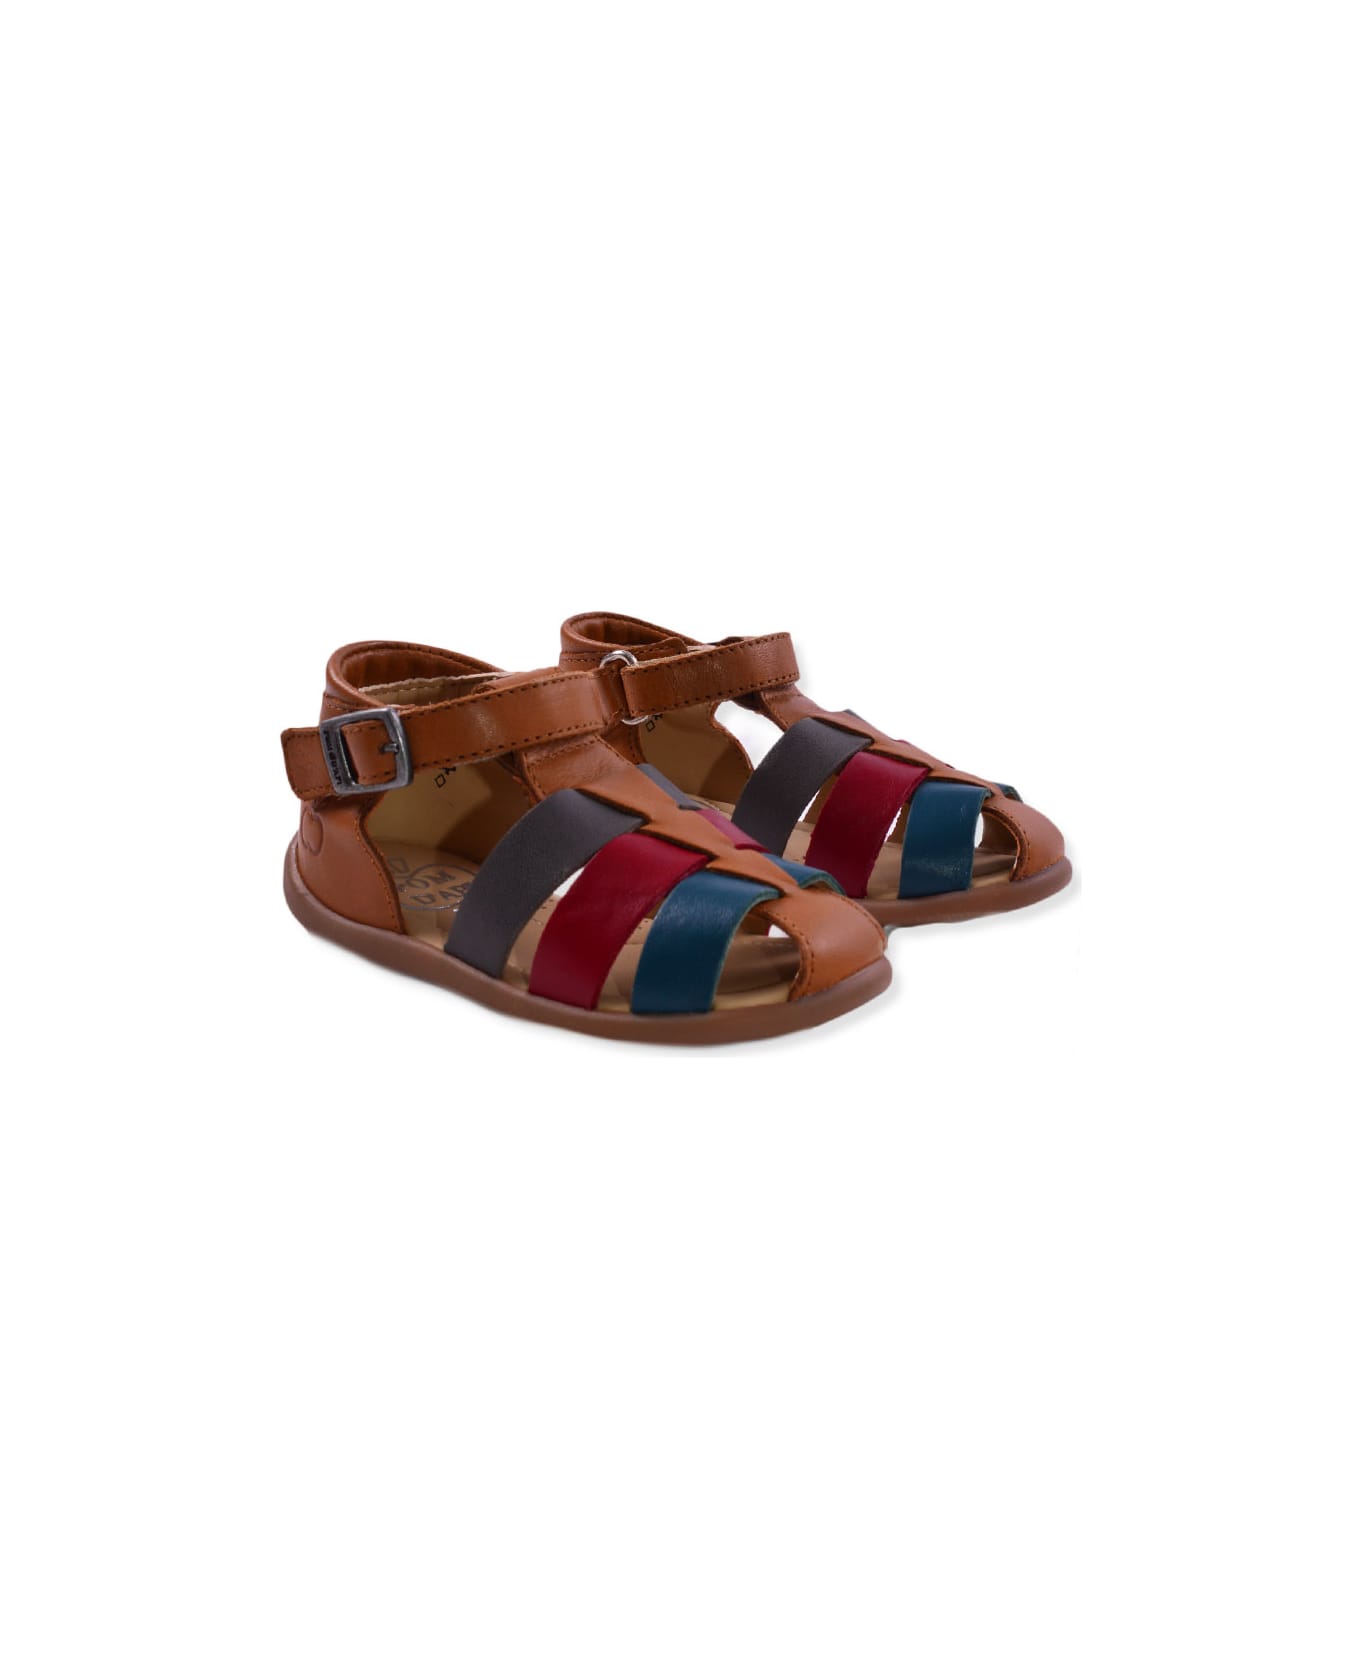 Pom d'Api Sandals In Colored Leather - Brown シューズ